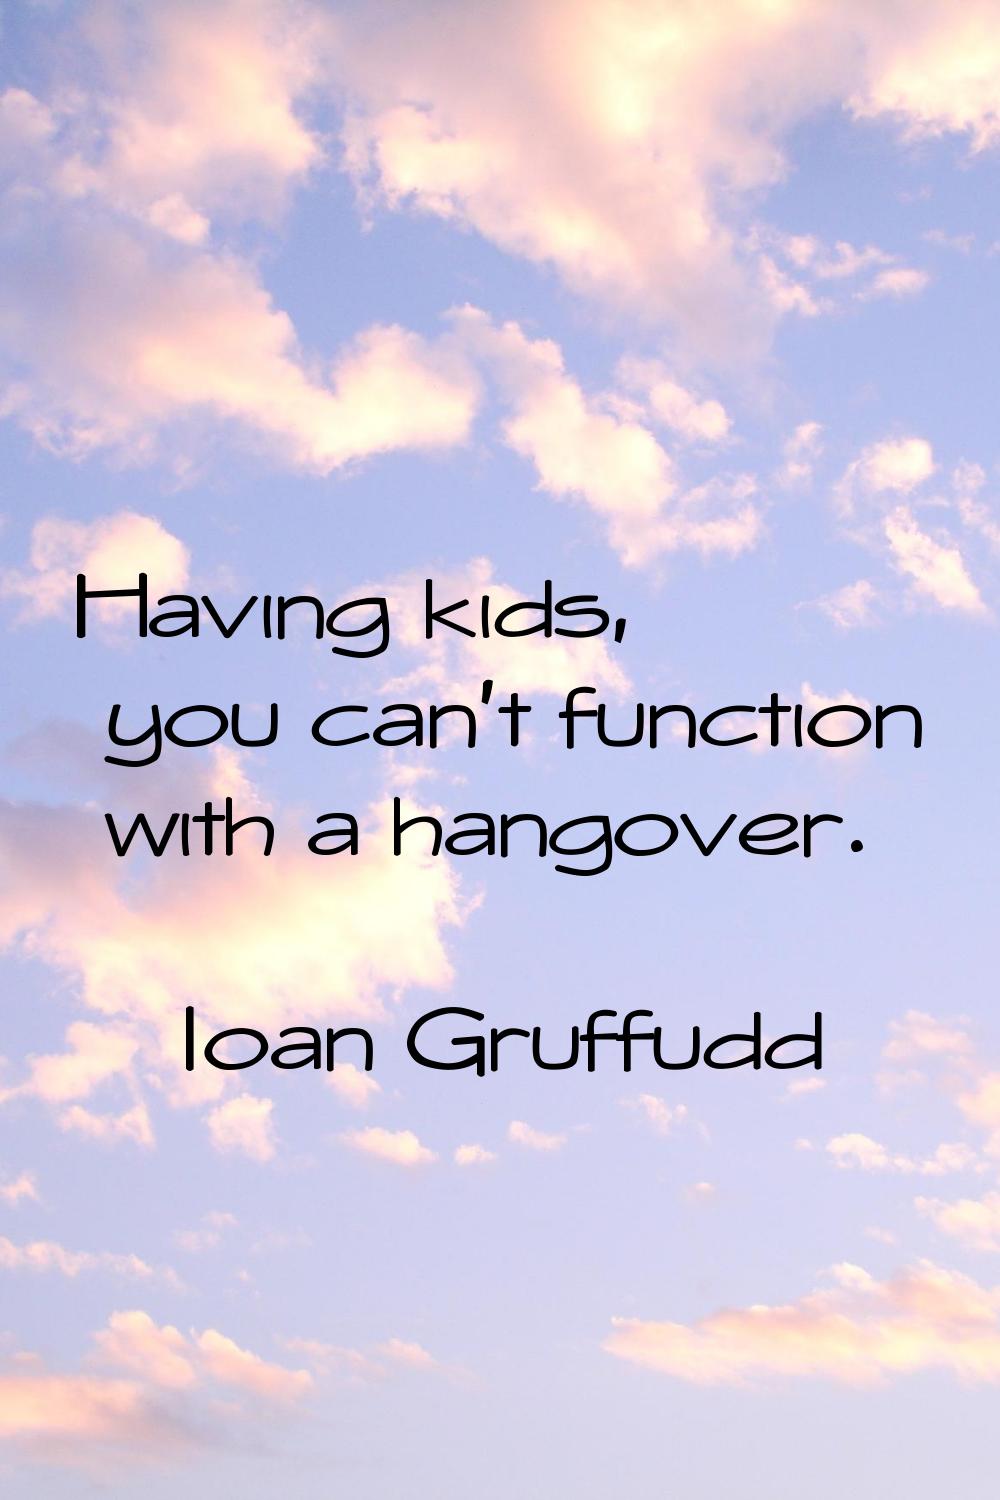 Having kids, you can't function with a hangover.